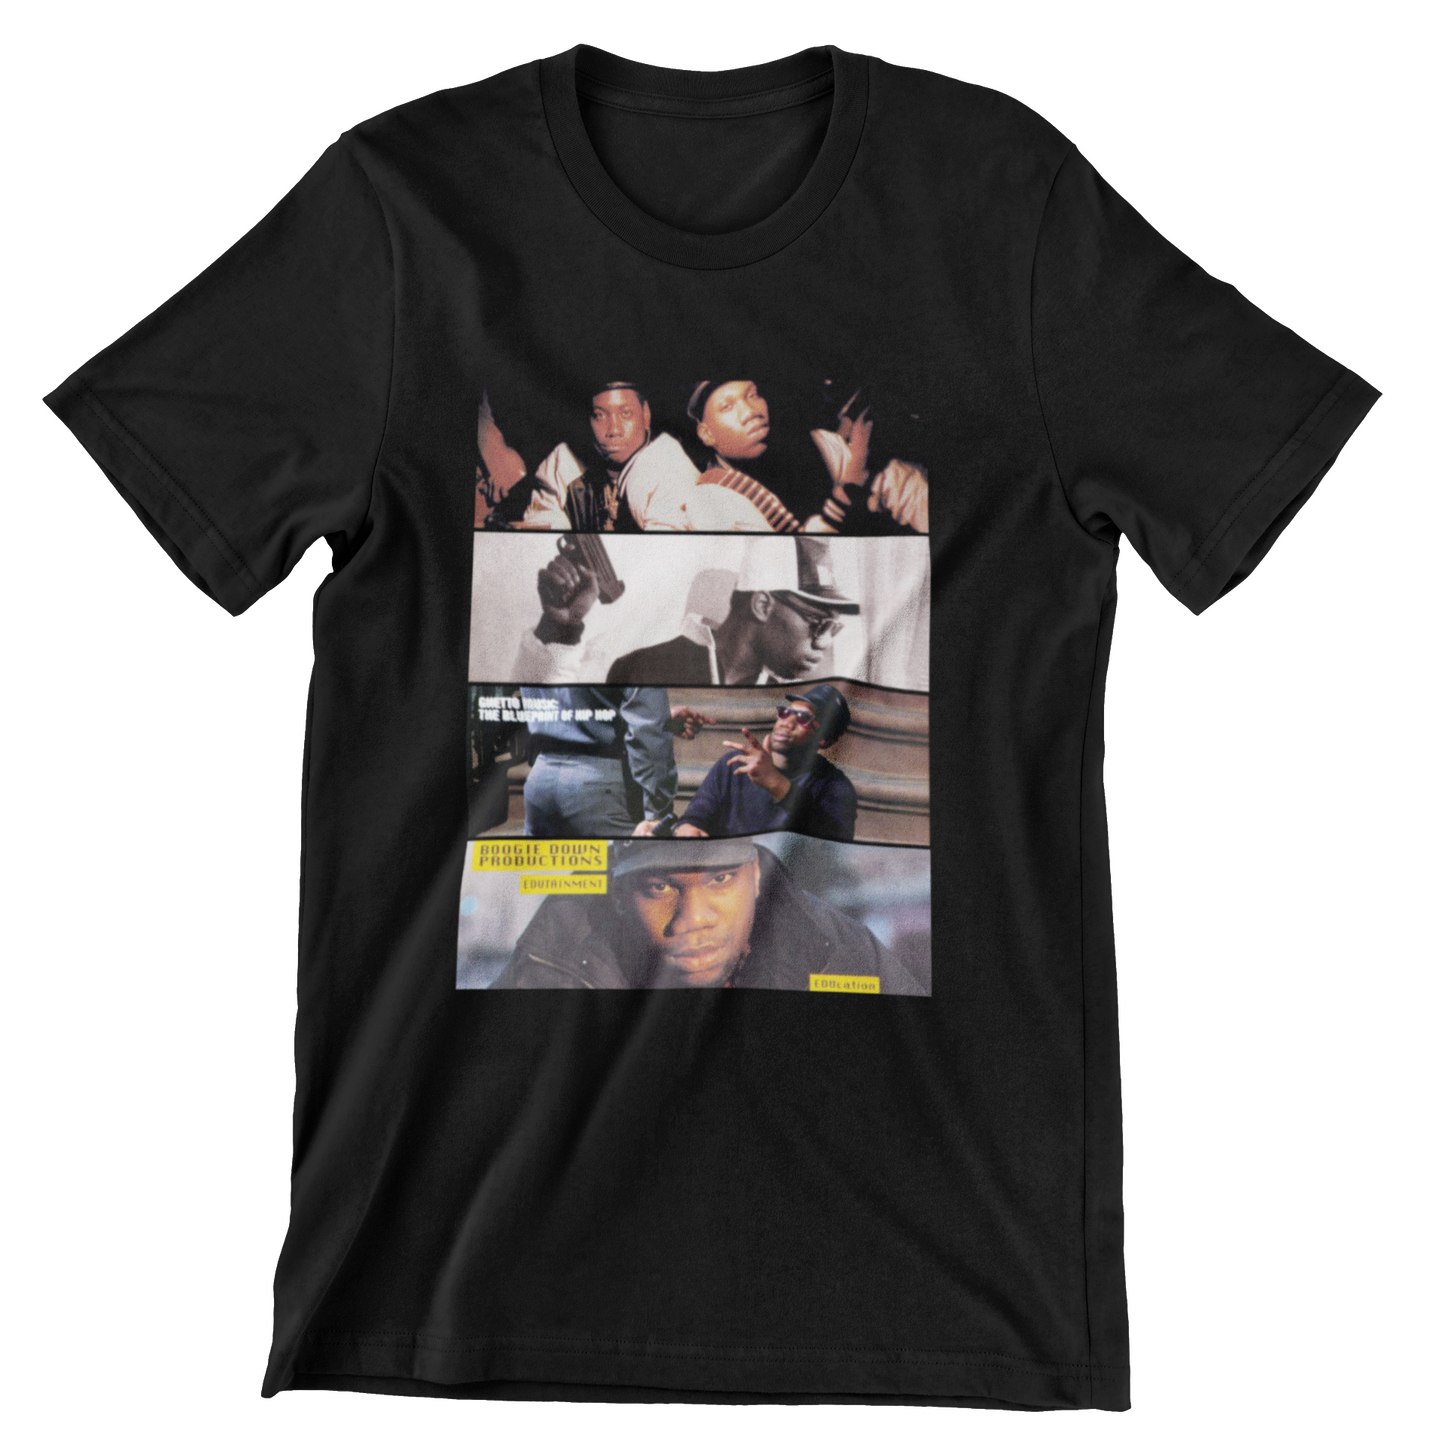 Boogie Down Productions (Album Cover Tee)